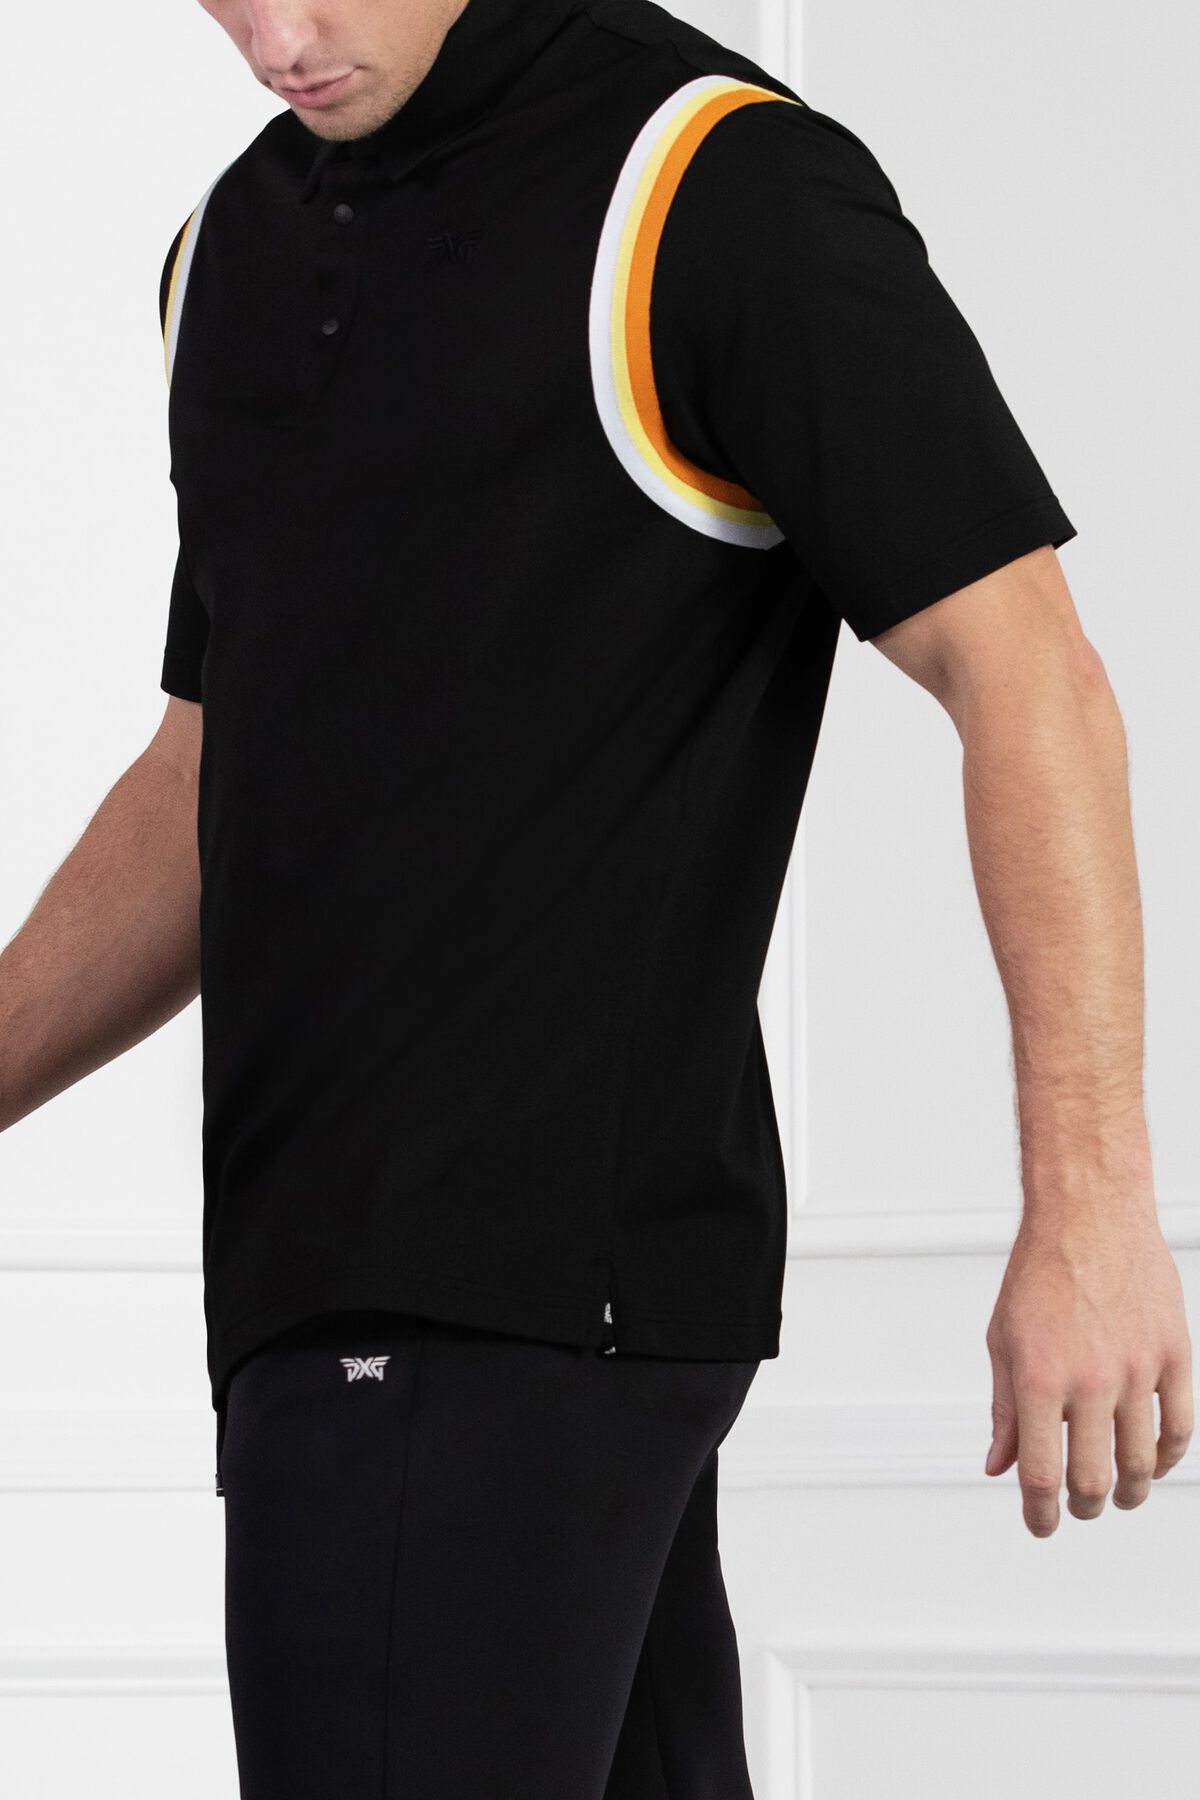 Comfort Fit Short Sleeve Banded Polo 